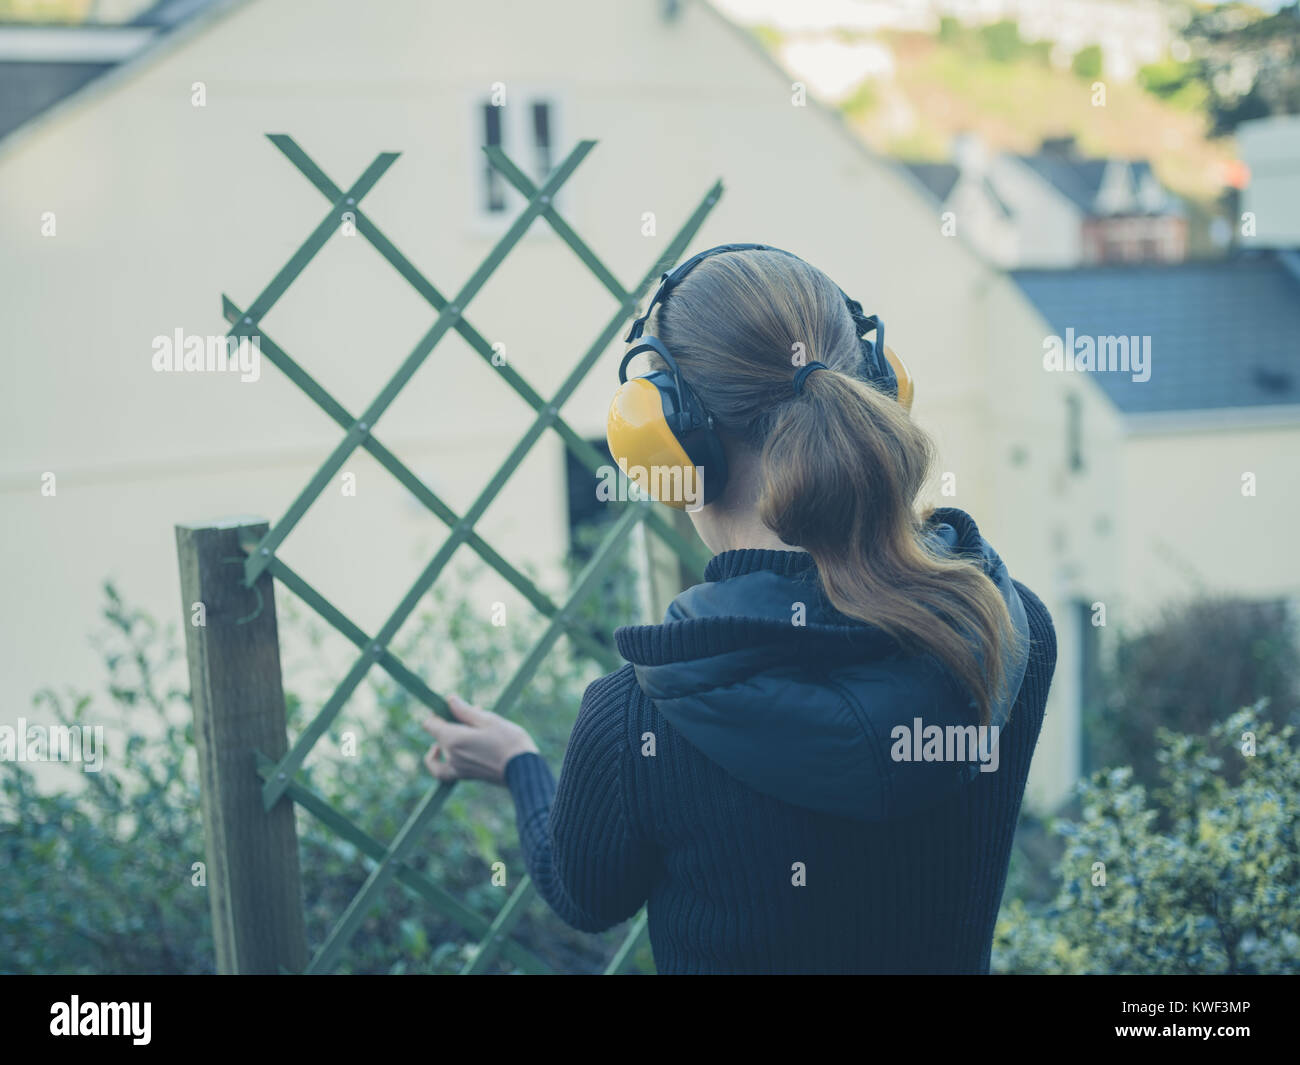 A young woman wearing ear muffs is building a fence in her garden Stock Photo